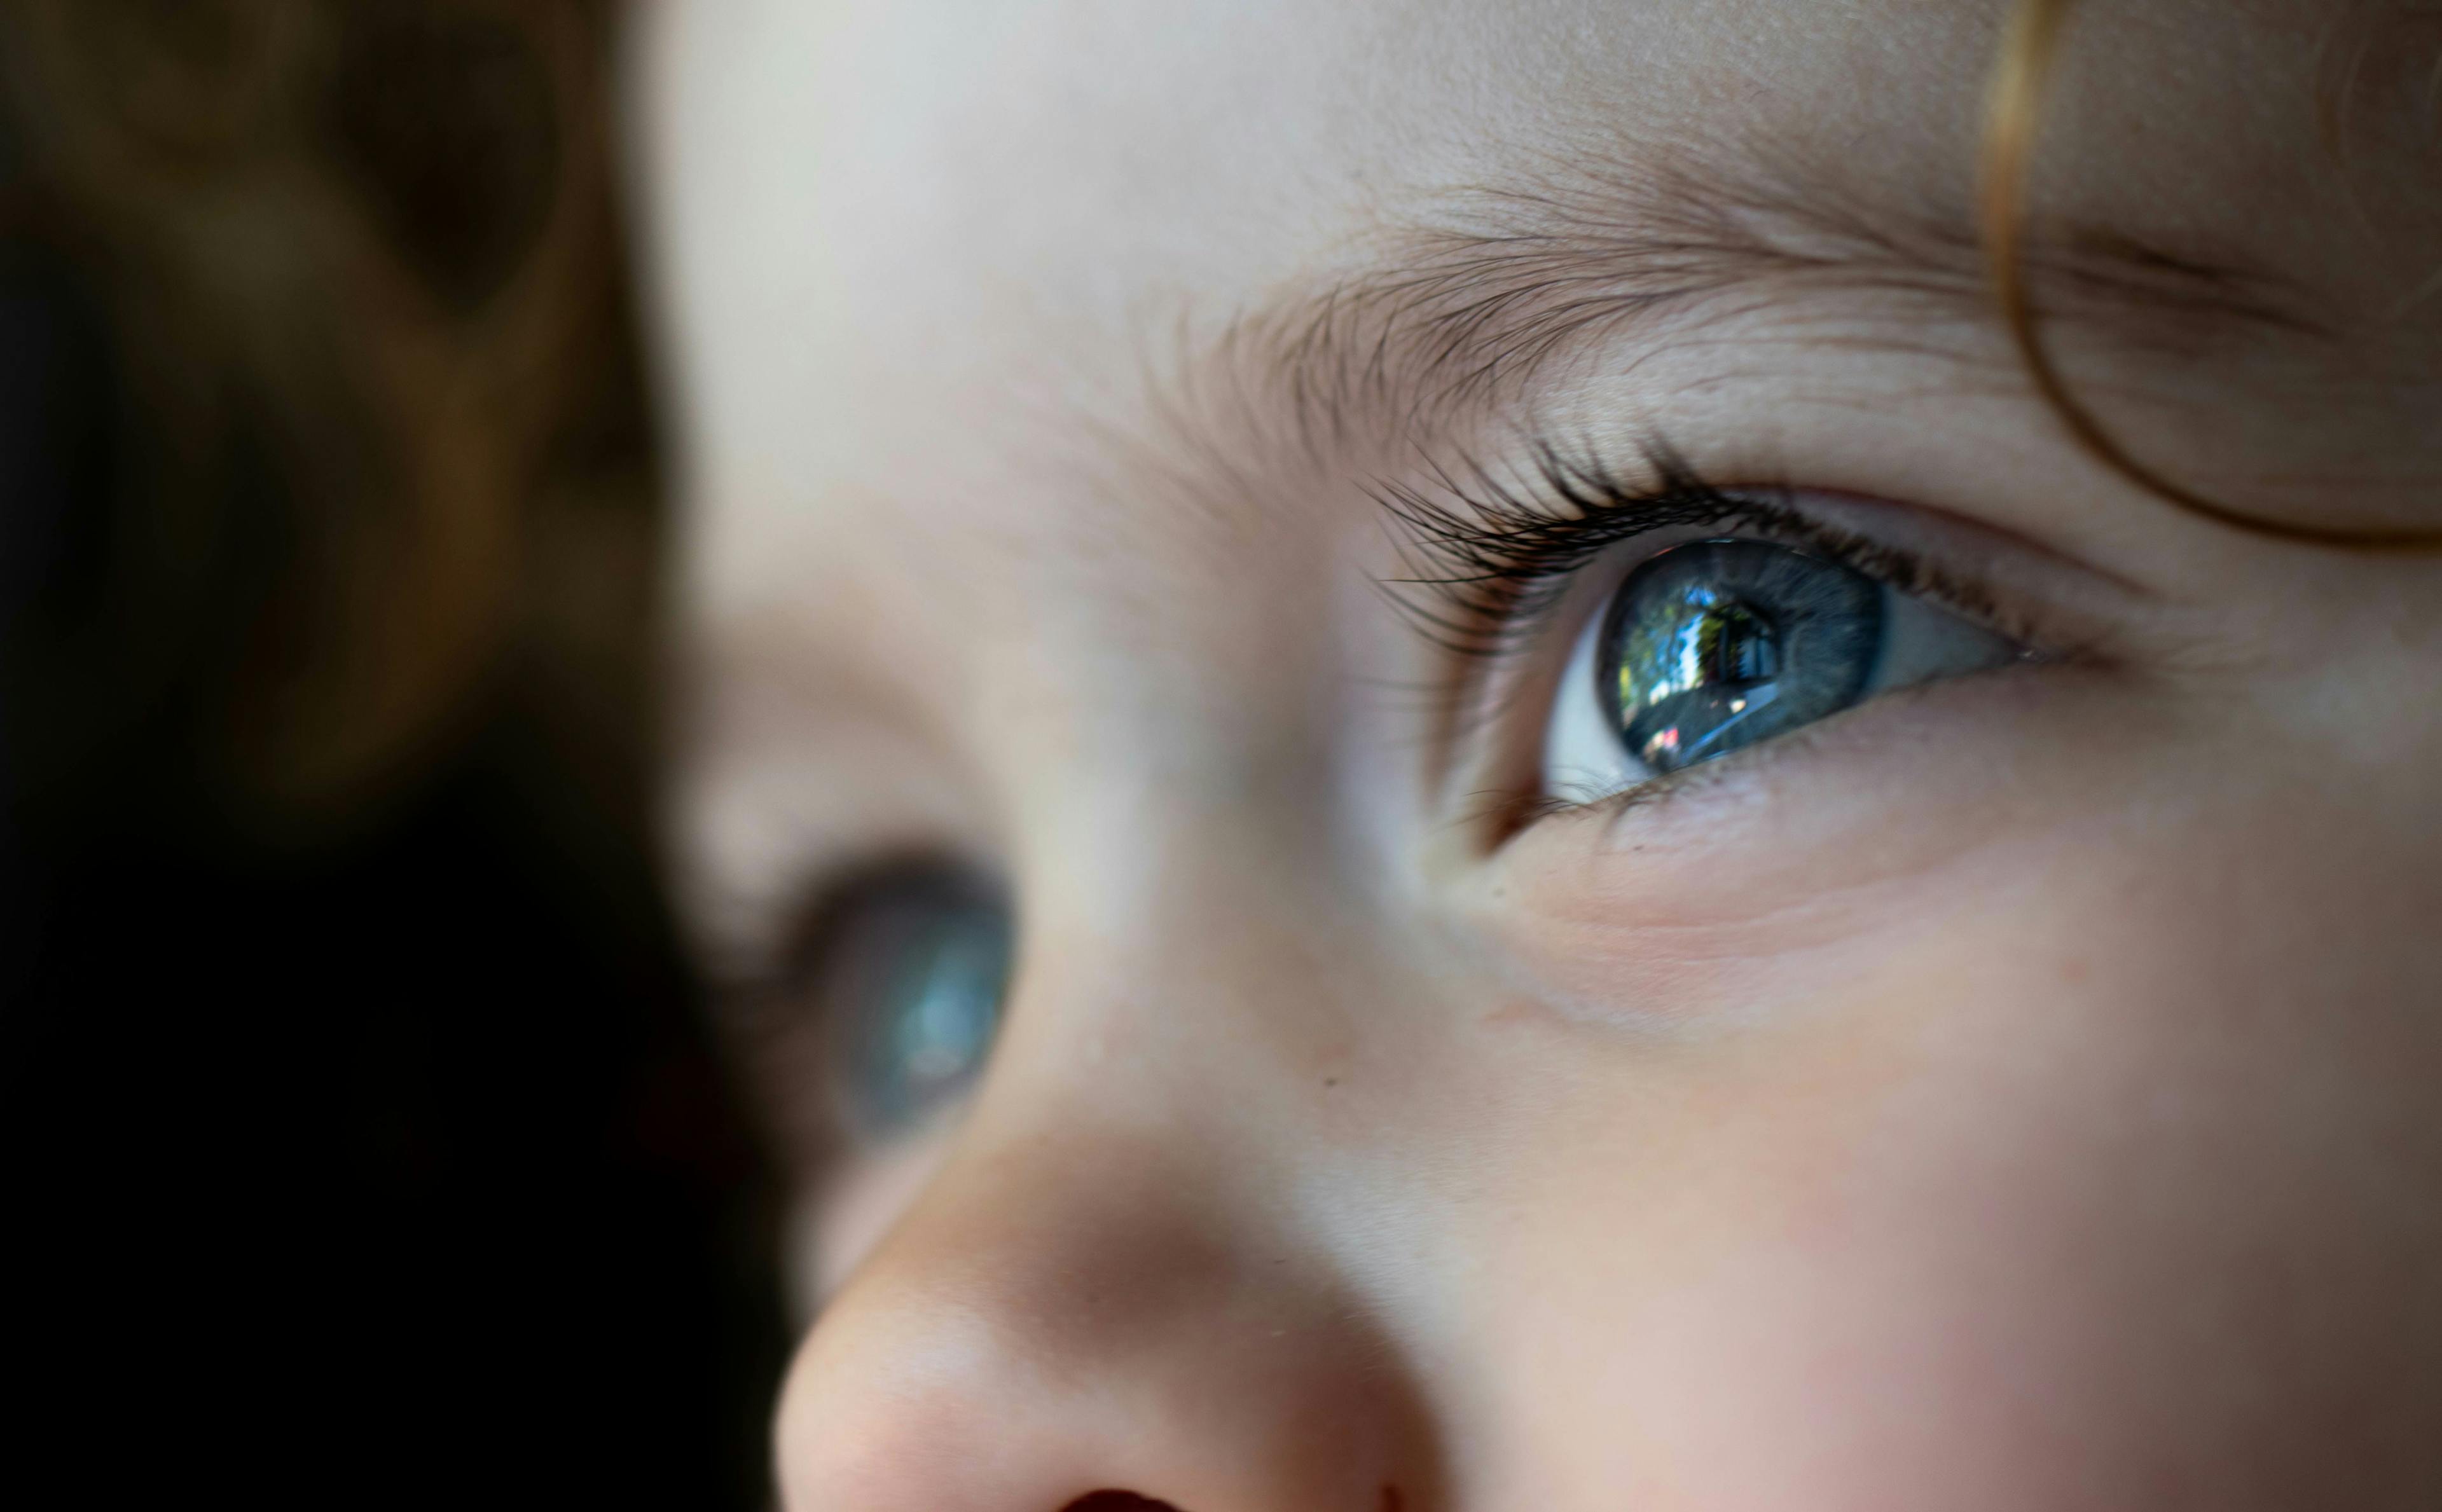 The CHAMP study has been designed, in collaboration with FDA, to evaluate whether NVK002 eye drops are safe and effective as a treatment for the progression of myopia in children. (Image courtesy of Adobe Stock)